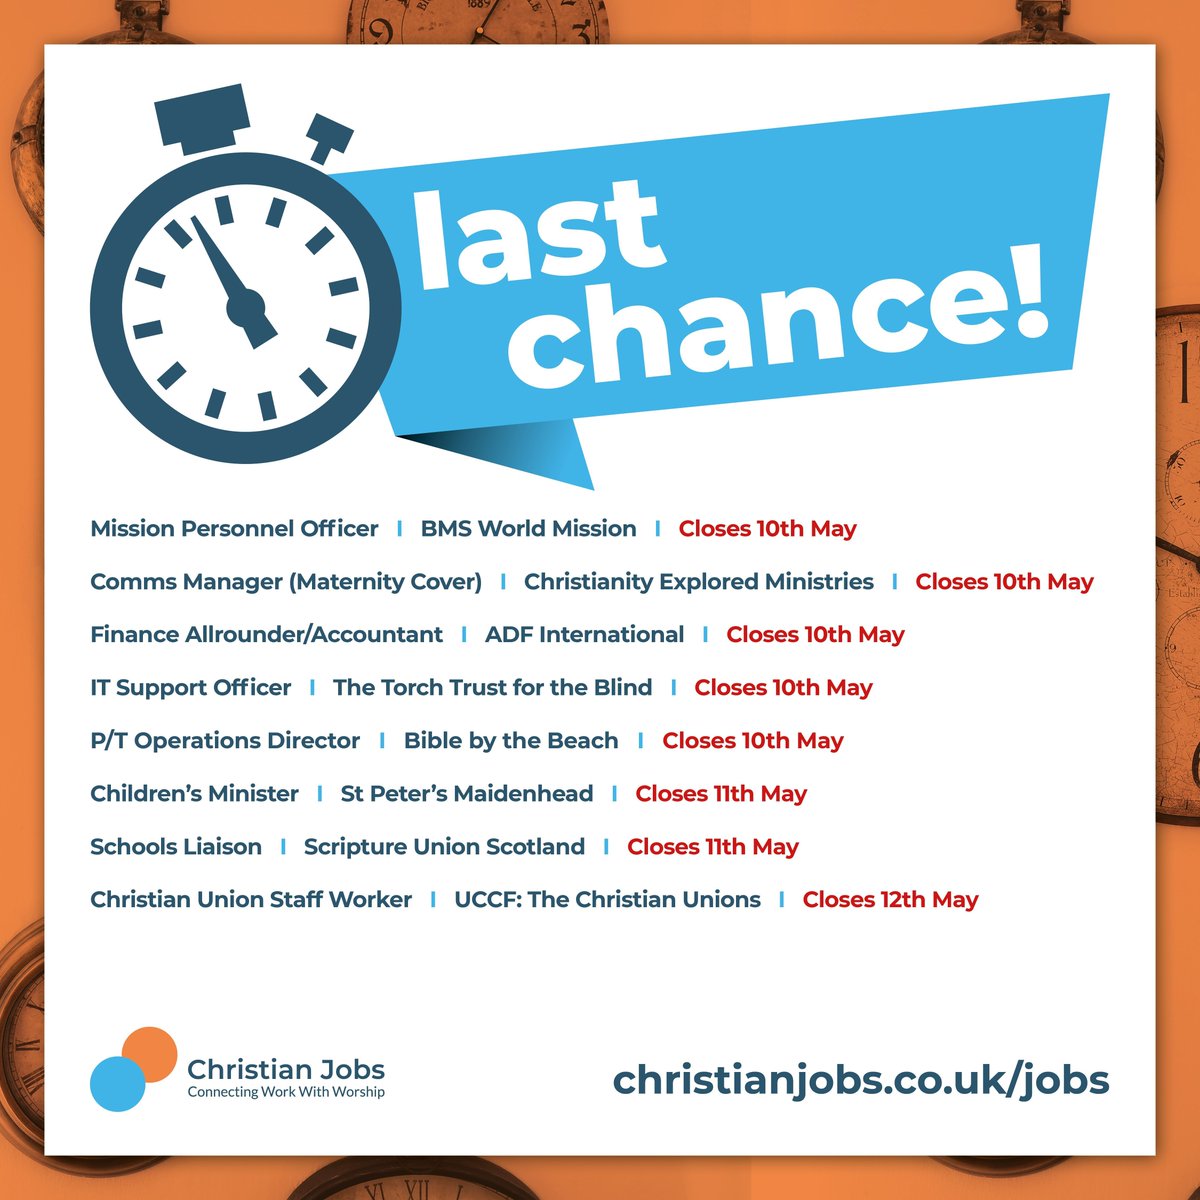 🕐 LAST CHANCE! 🕐 If you're interested in applying for any of the jobs we have on our site, now's the time to do it as there are plenty of them ending this week! Find your next opportunity at christianjobs.co.uk/jobs #UKChristianJobs #NewJob #JobSearch #ChristianJobs #Jobs